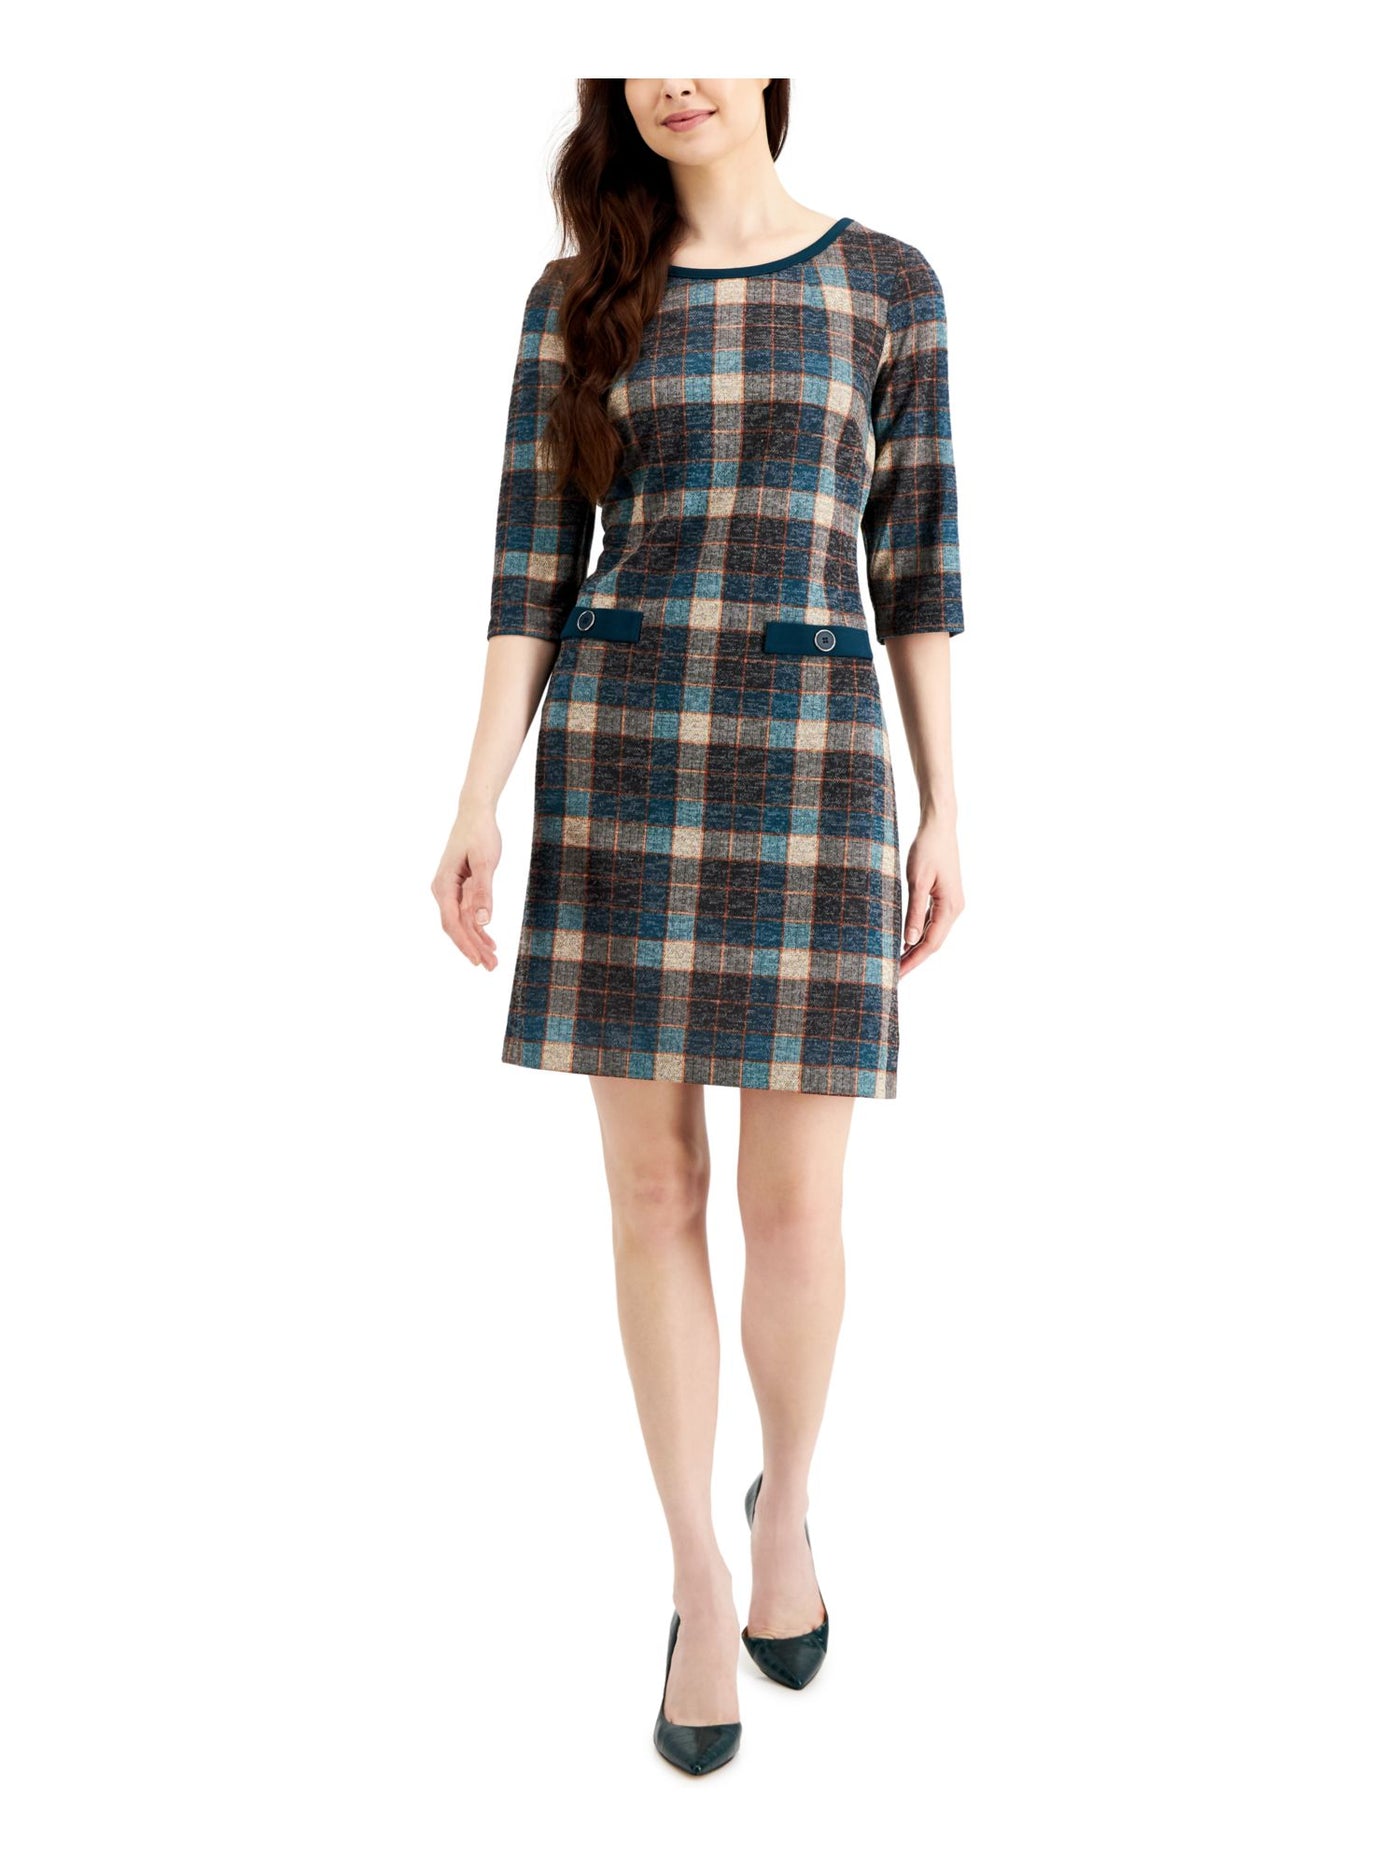 CONNECTED APPAREL Womens Teal Stretch Plaid Elbow Sleeve Round Neck Above The Knee Wear To Work Sheath Dress 10